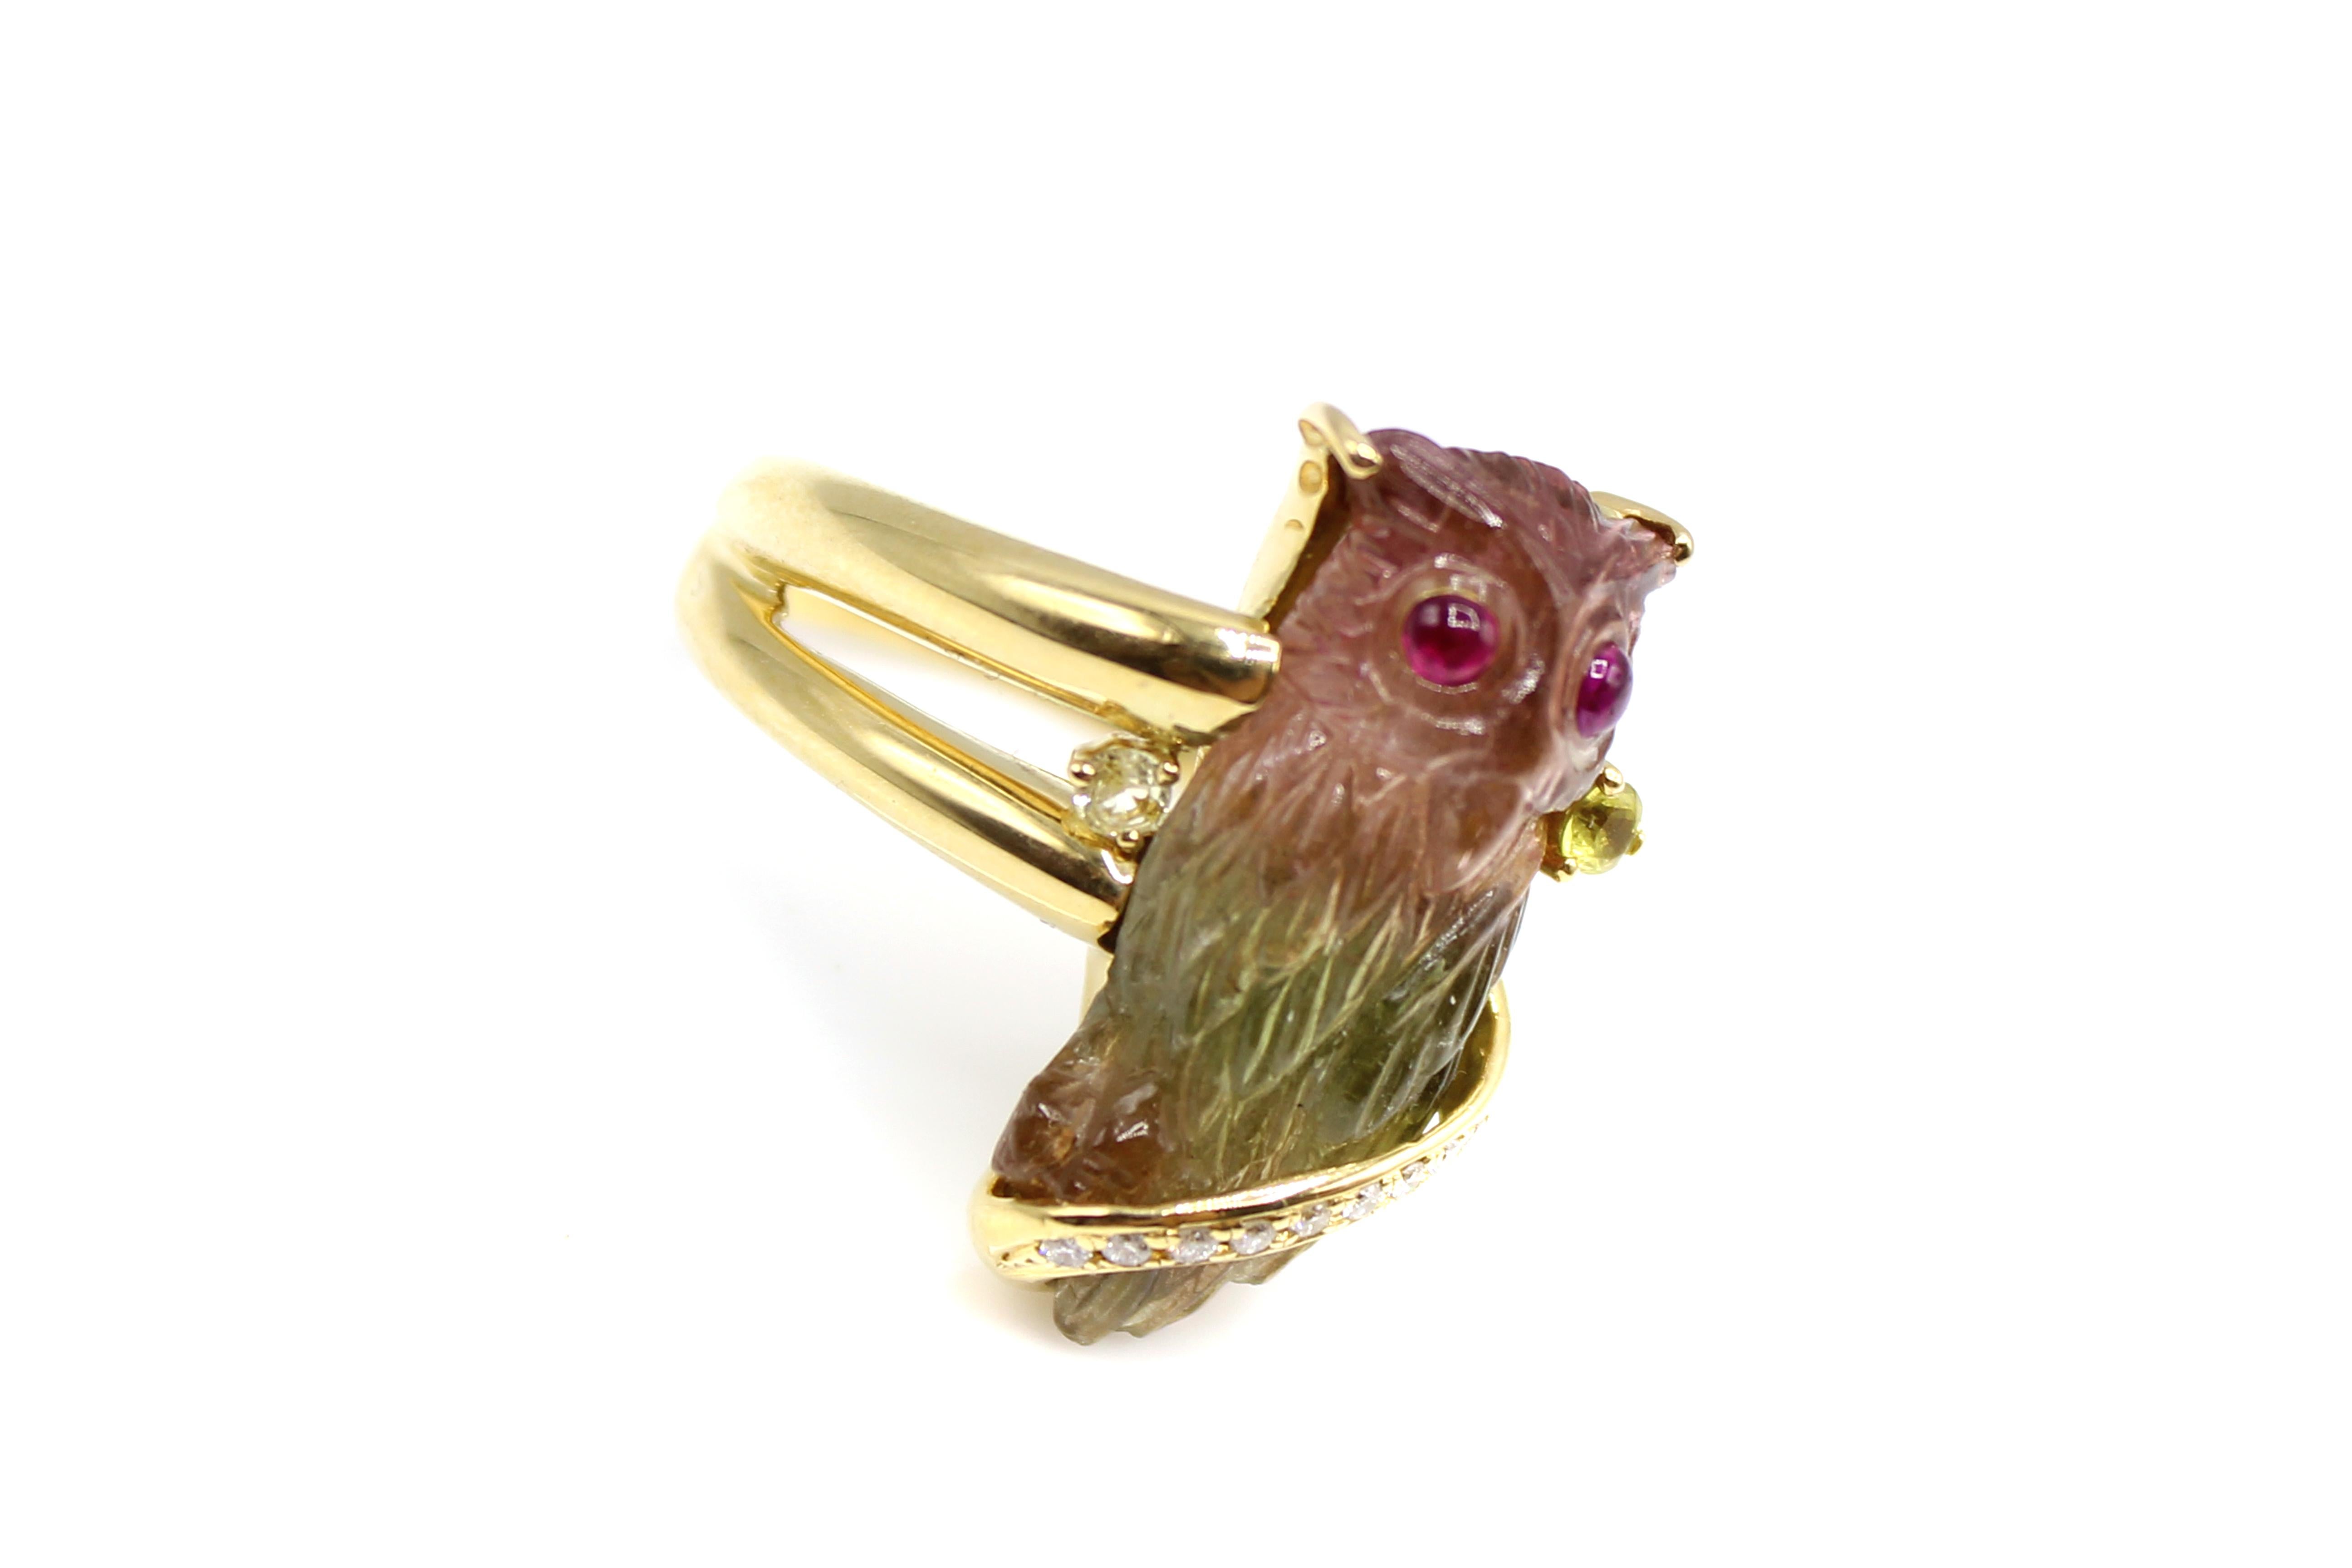 This interesting and unique ring is centrally set with a bold colorful watermelon tourmaline carved owl. The asymmetrical split shank securely holds the tourmaline owl in place, with one side of the gold lapping over the tourmaline with 9 small